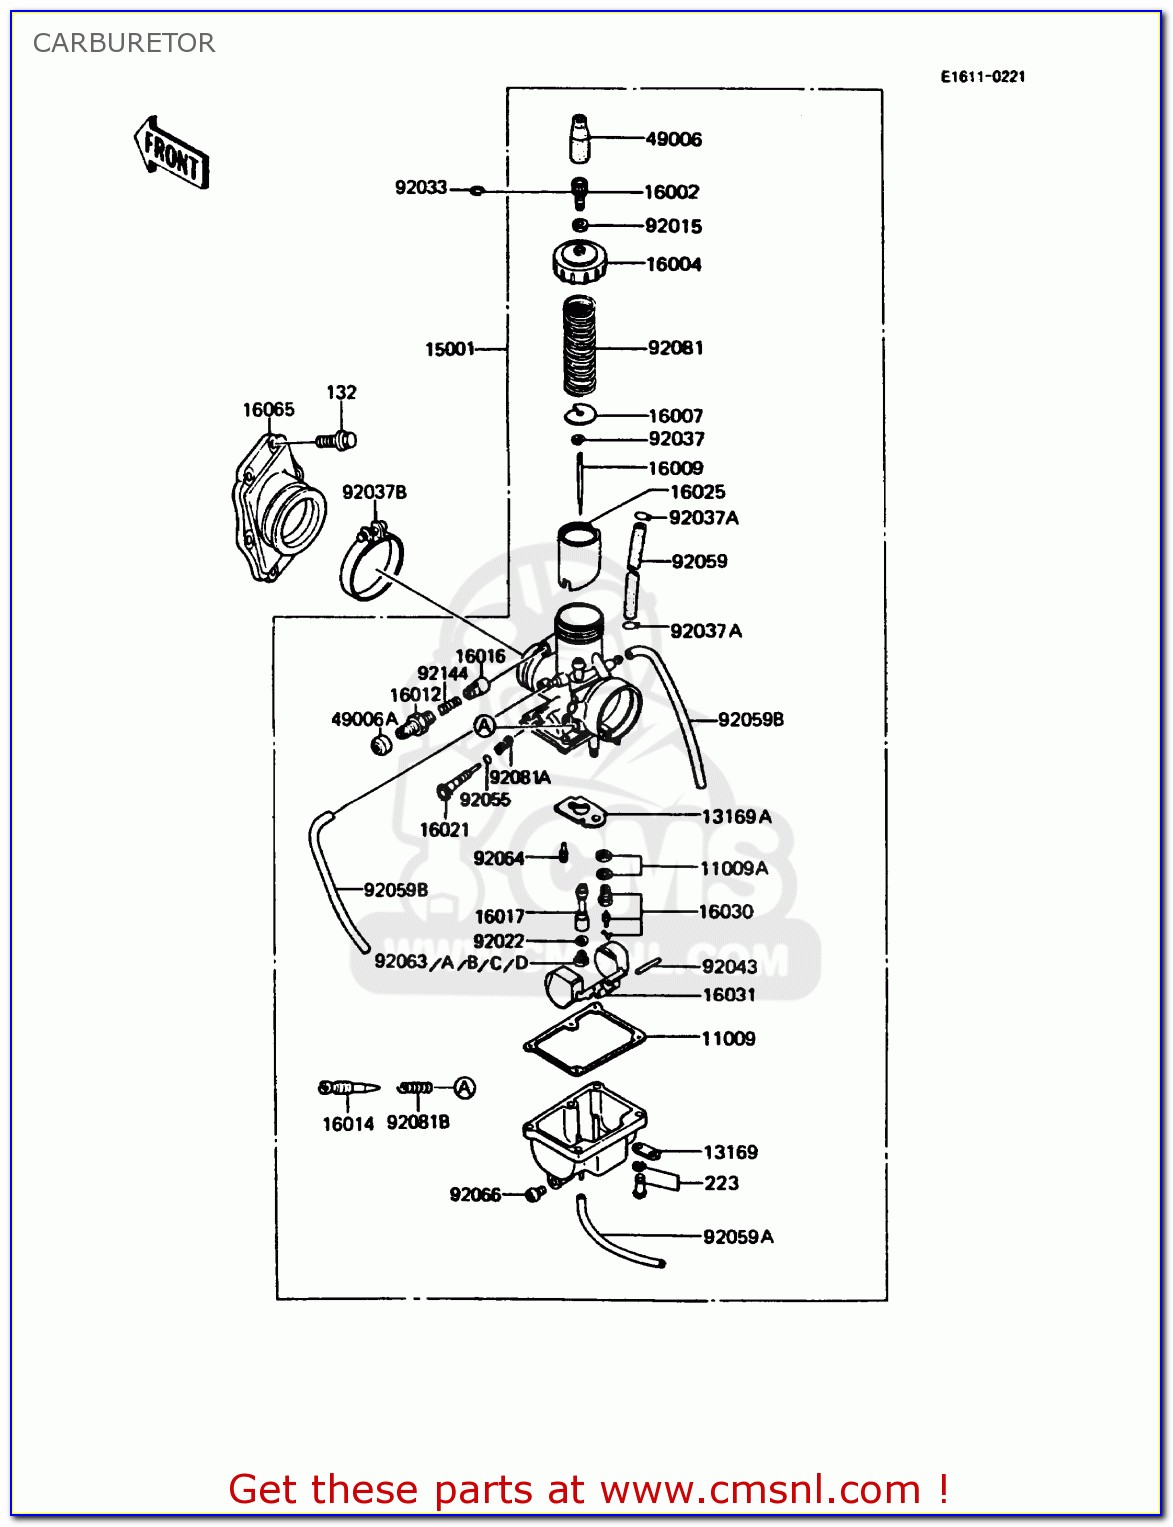 1970 Ford Truck Wiring Diagram